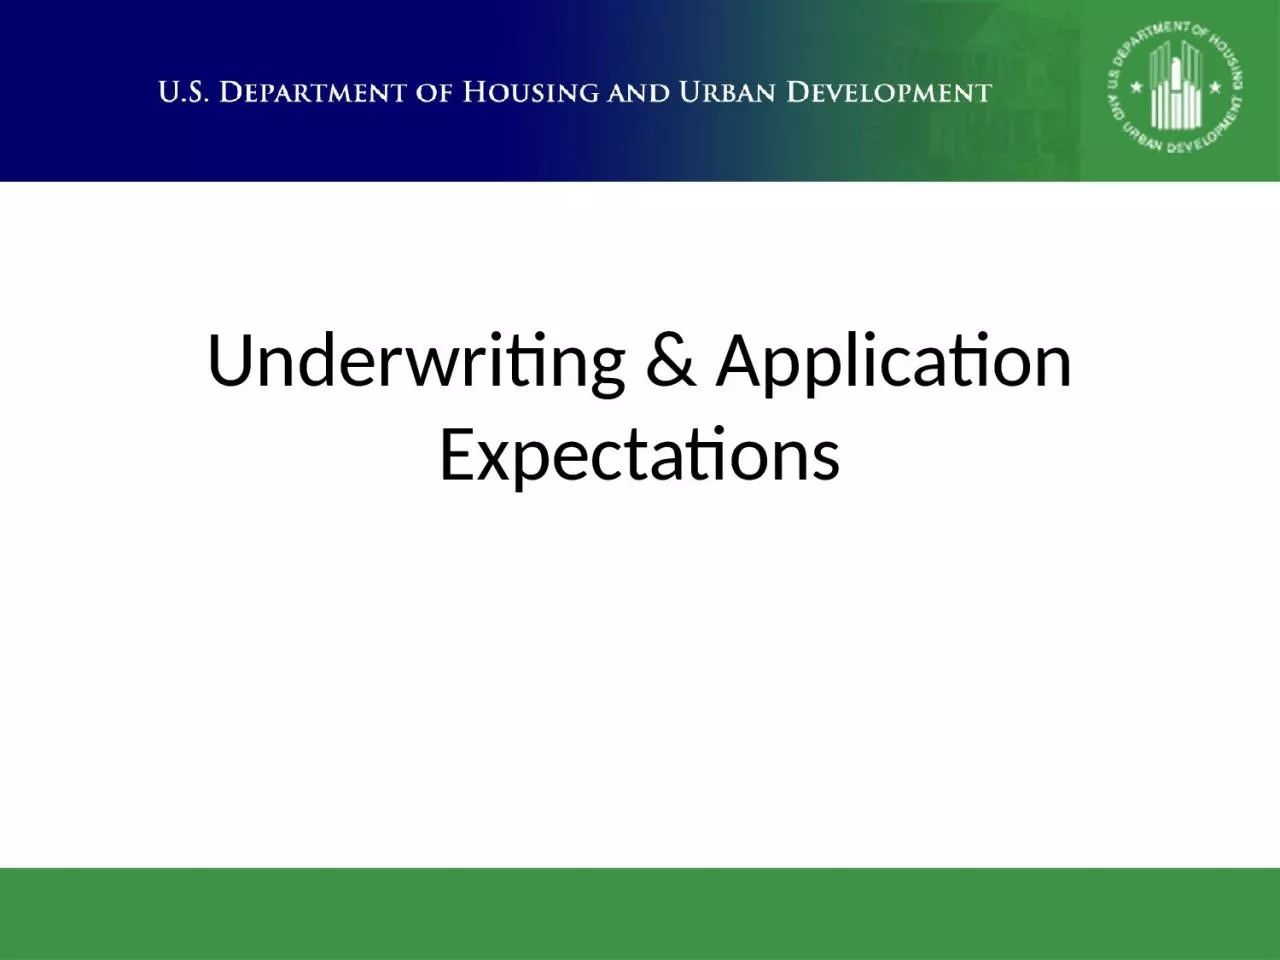 Underwriting & Application Expectations